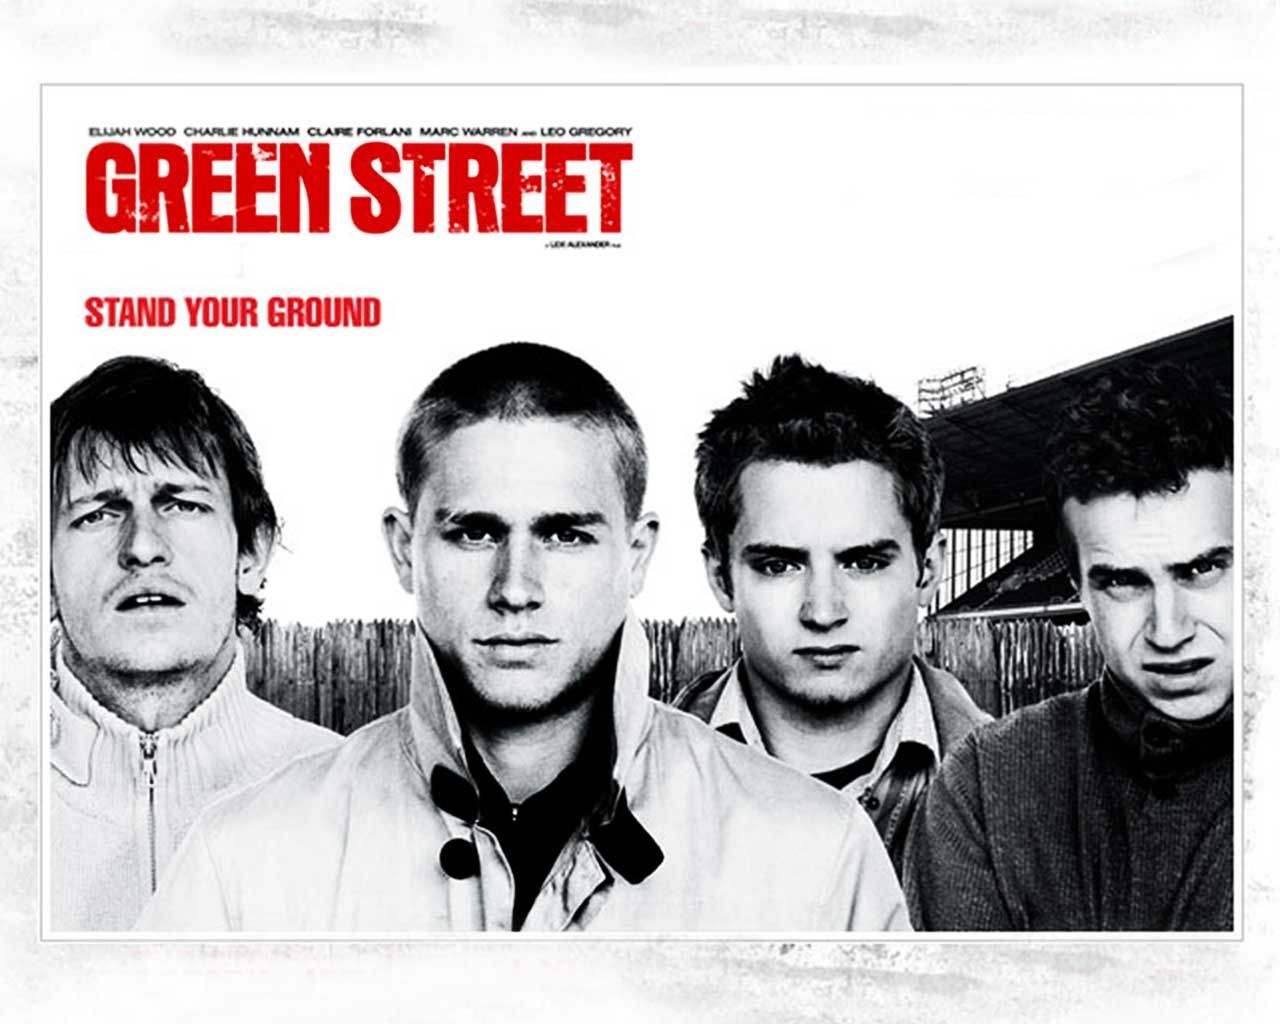 if you haven't seen this movie yet, WATCH IT NOW. Green street, Charlie hunnam, Movies